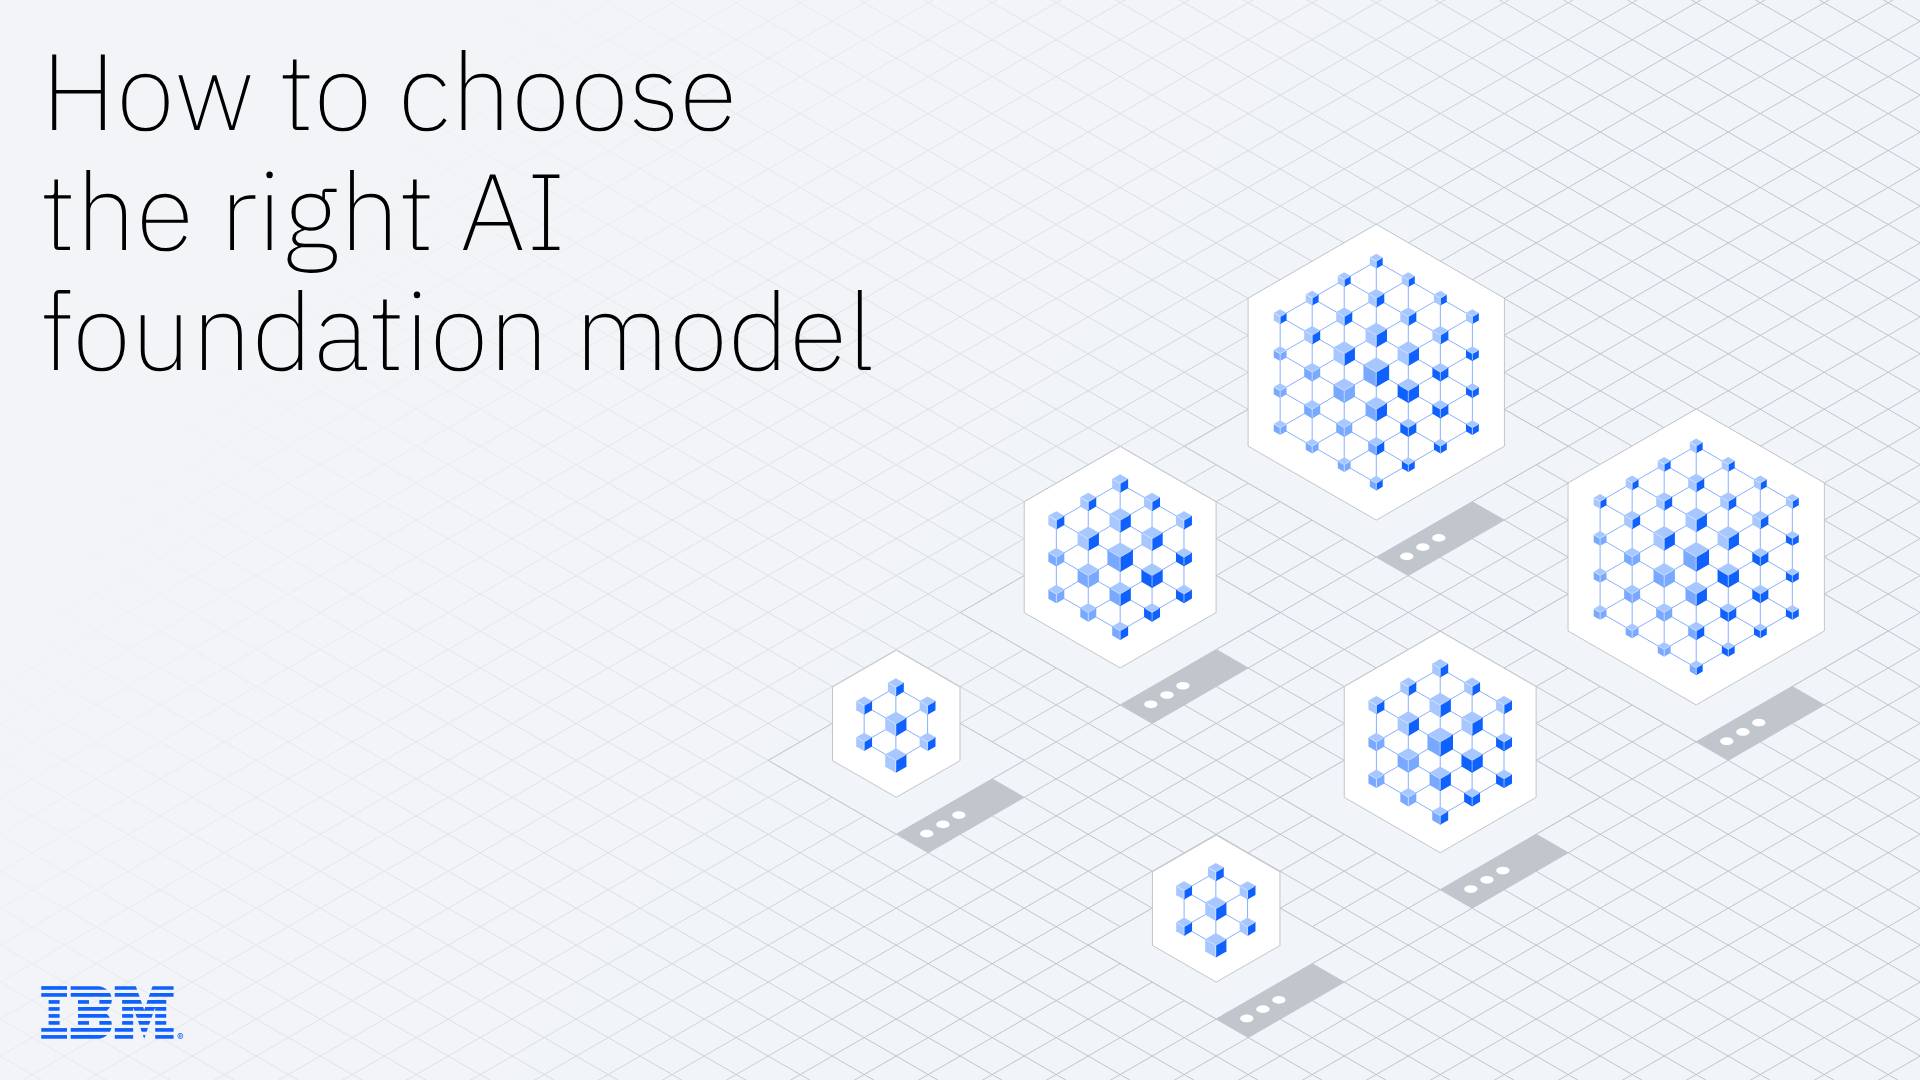 How to choose the right AI foundation model